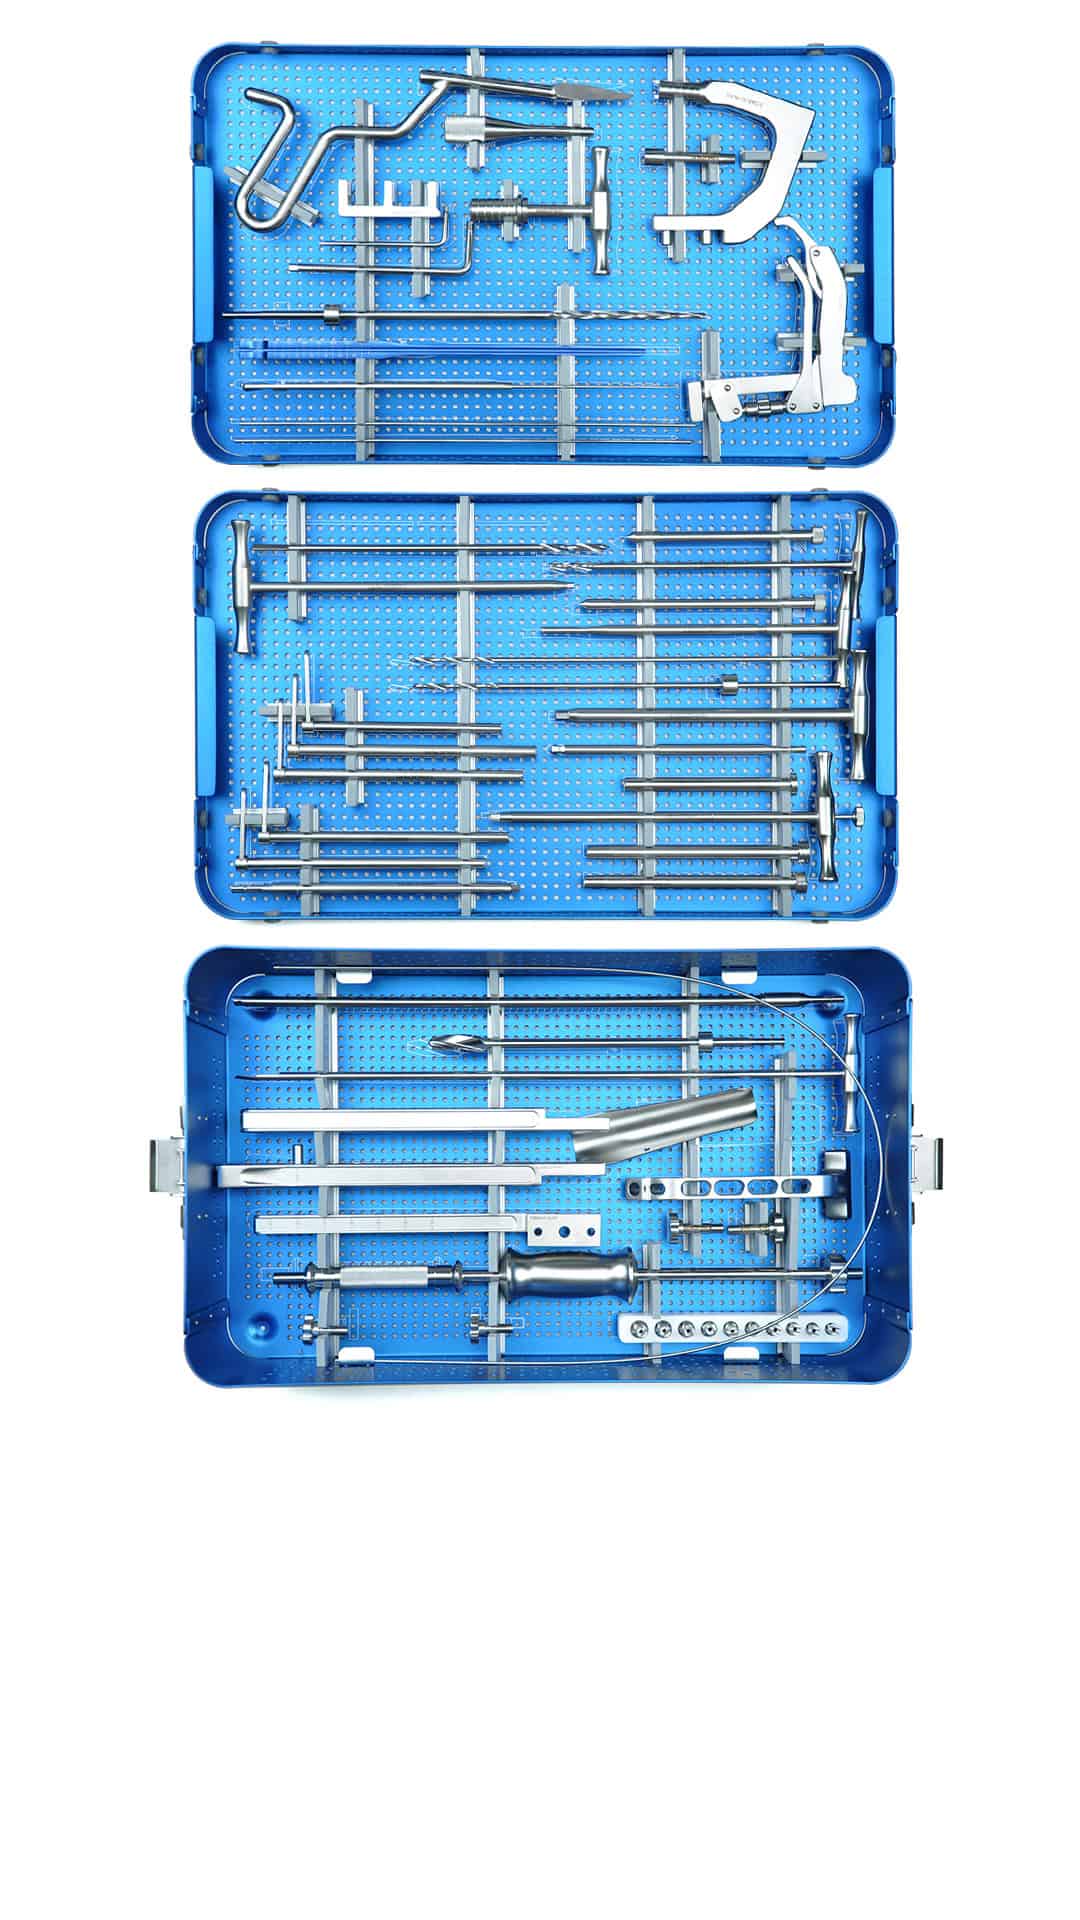 NEW FEMORAL RECONSTRUCTION INTRAMEDULLARY NAIL INSTRUMENT SET - ORTIMPLANT